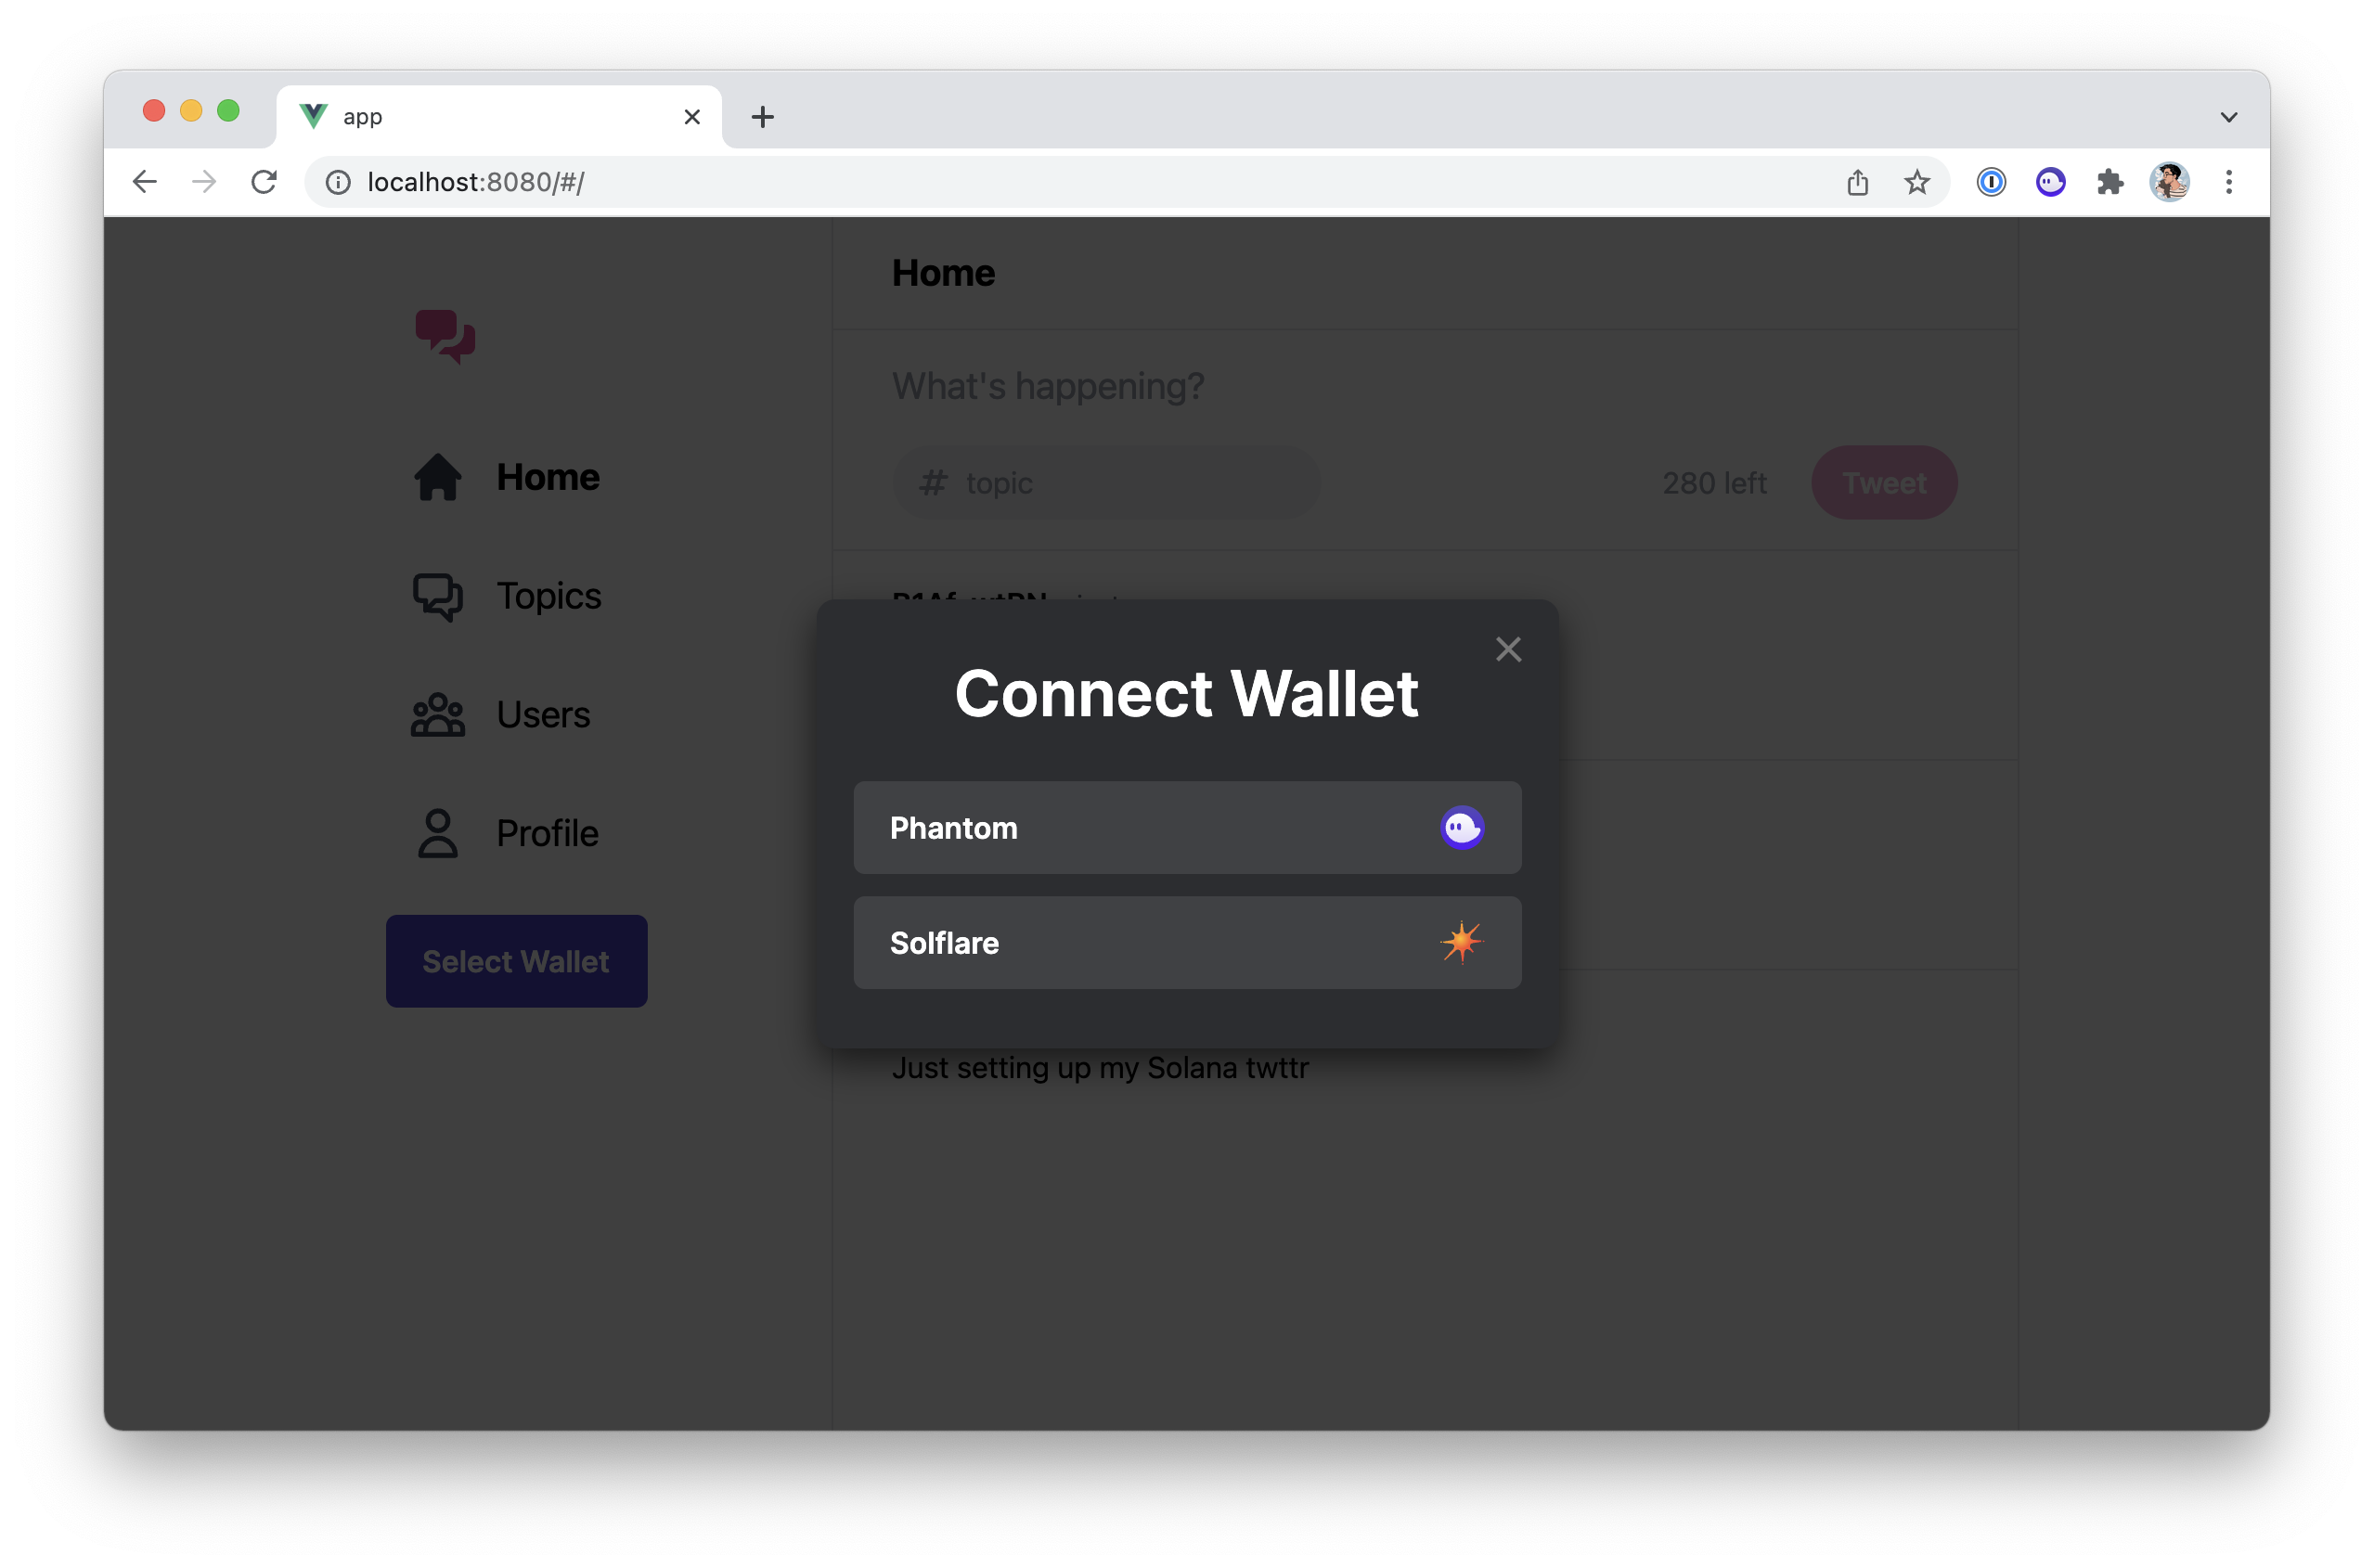 Screenshot of the application with the "Connect Wallet" modal opened.